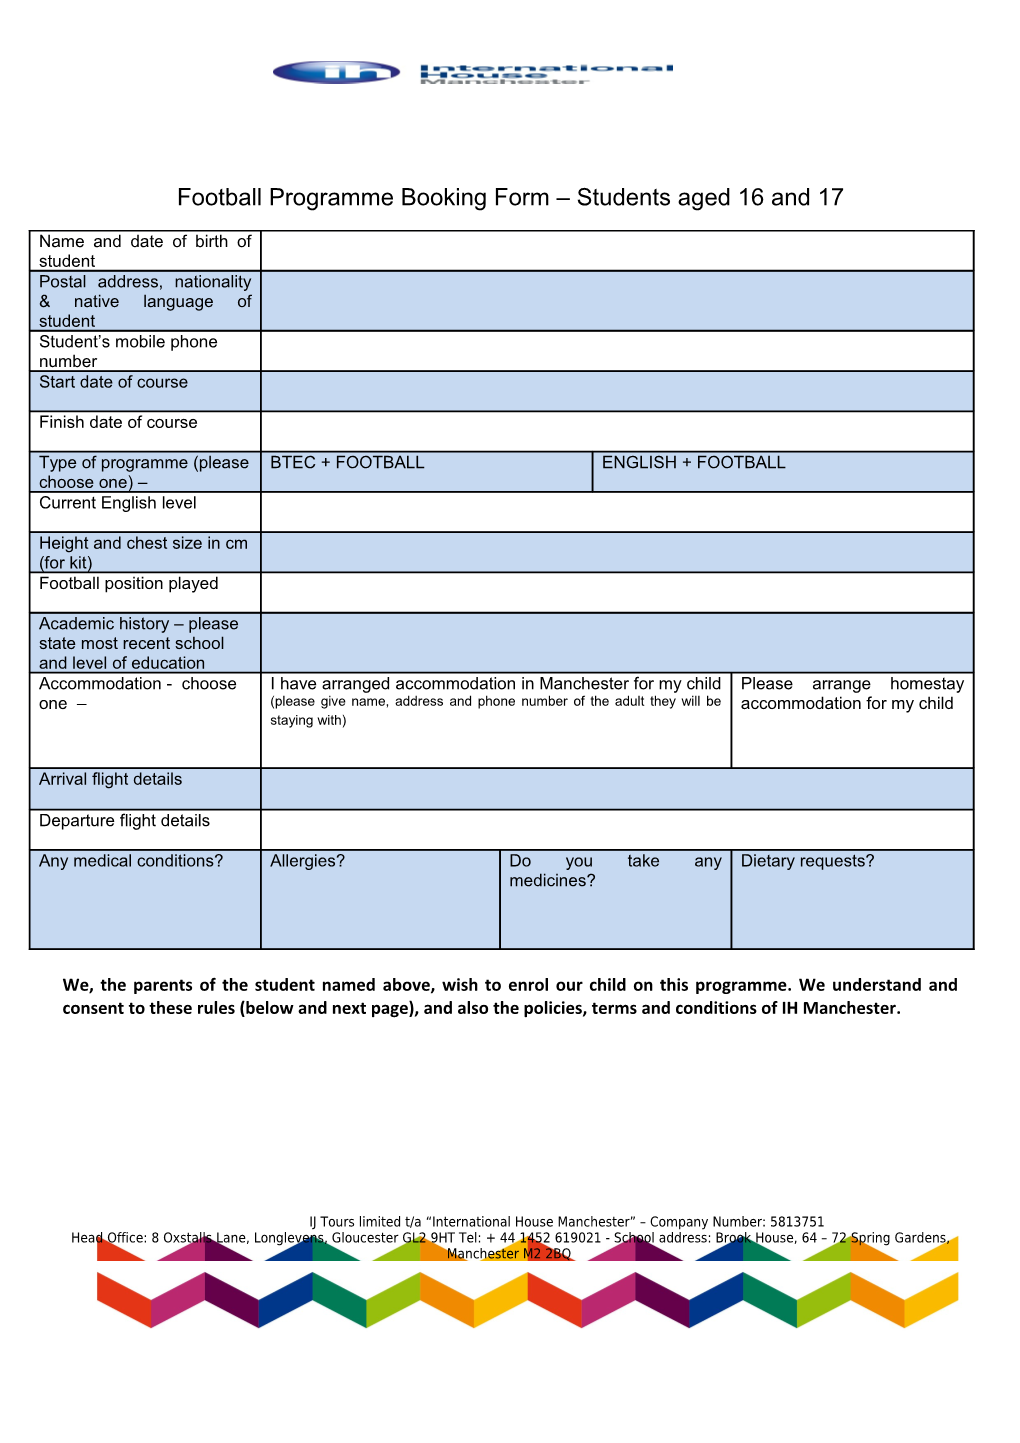 Football Programme Booking Form Students Aged 16 and 17